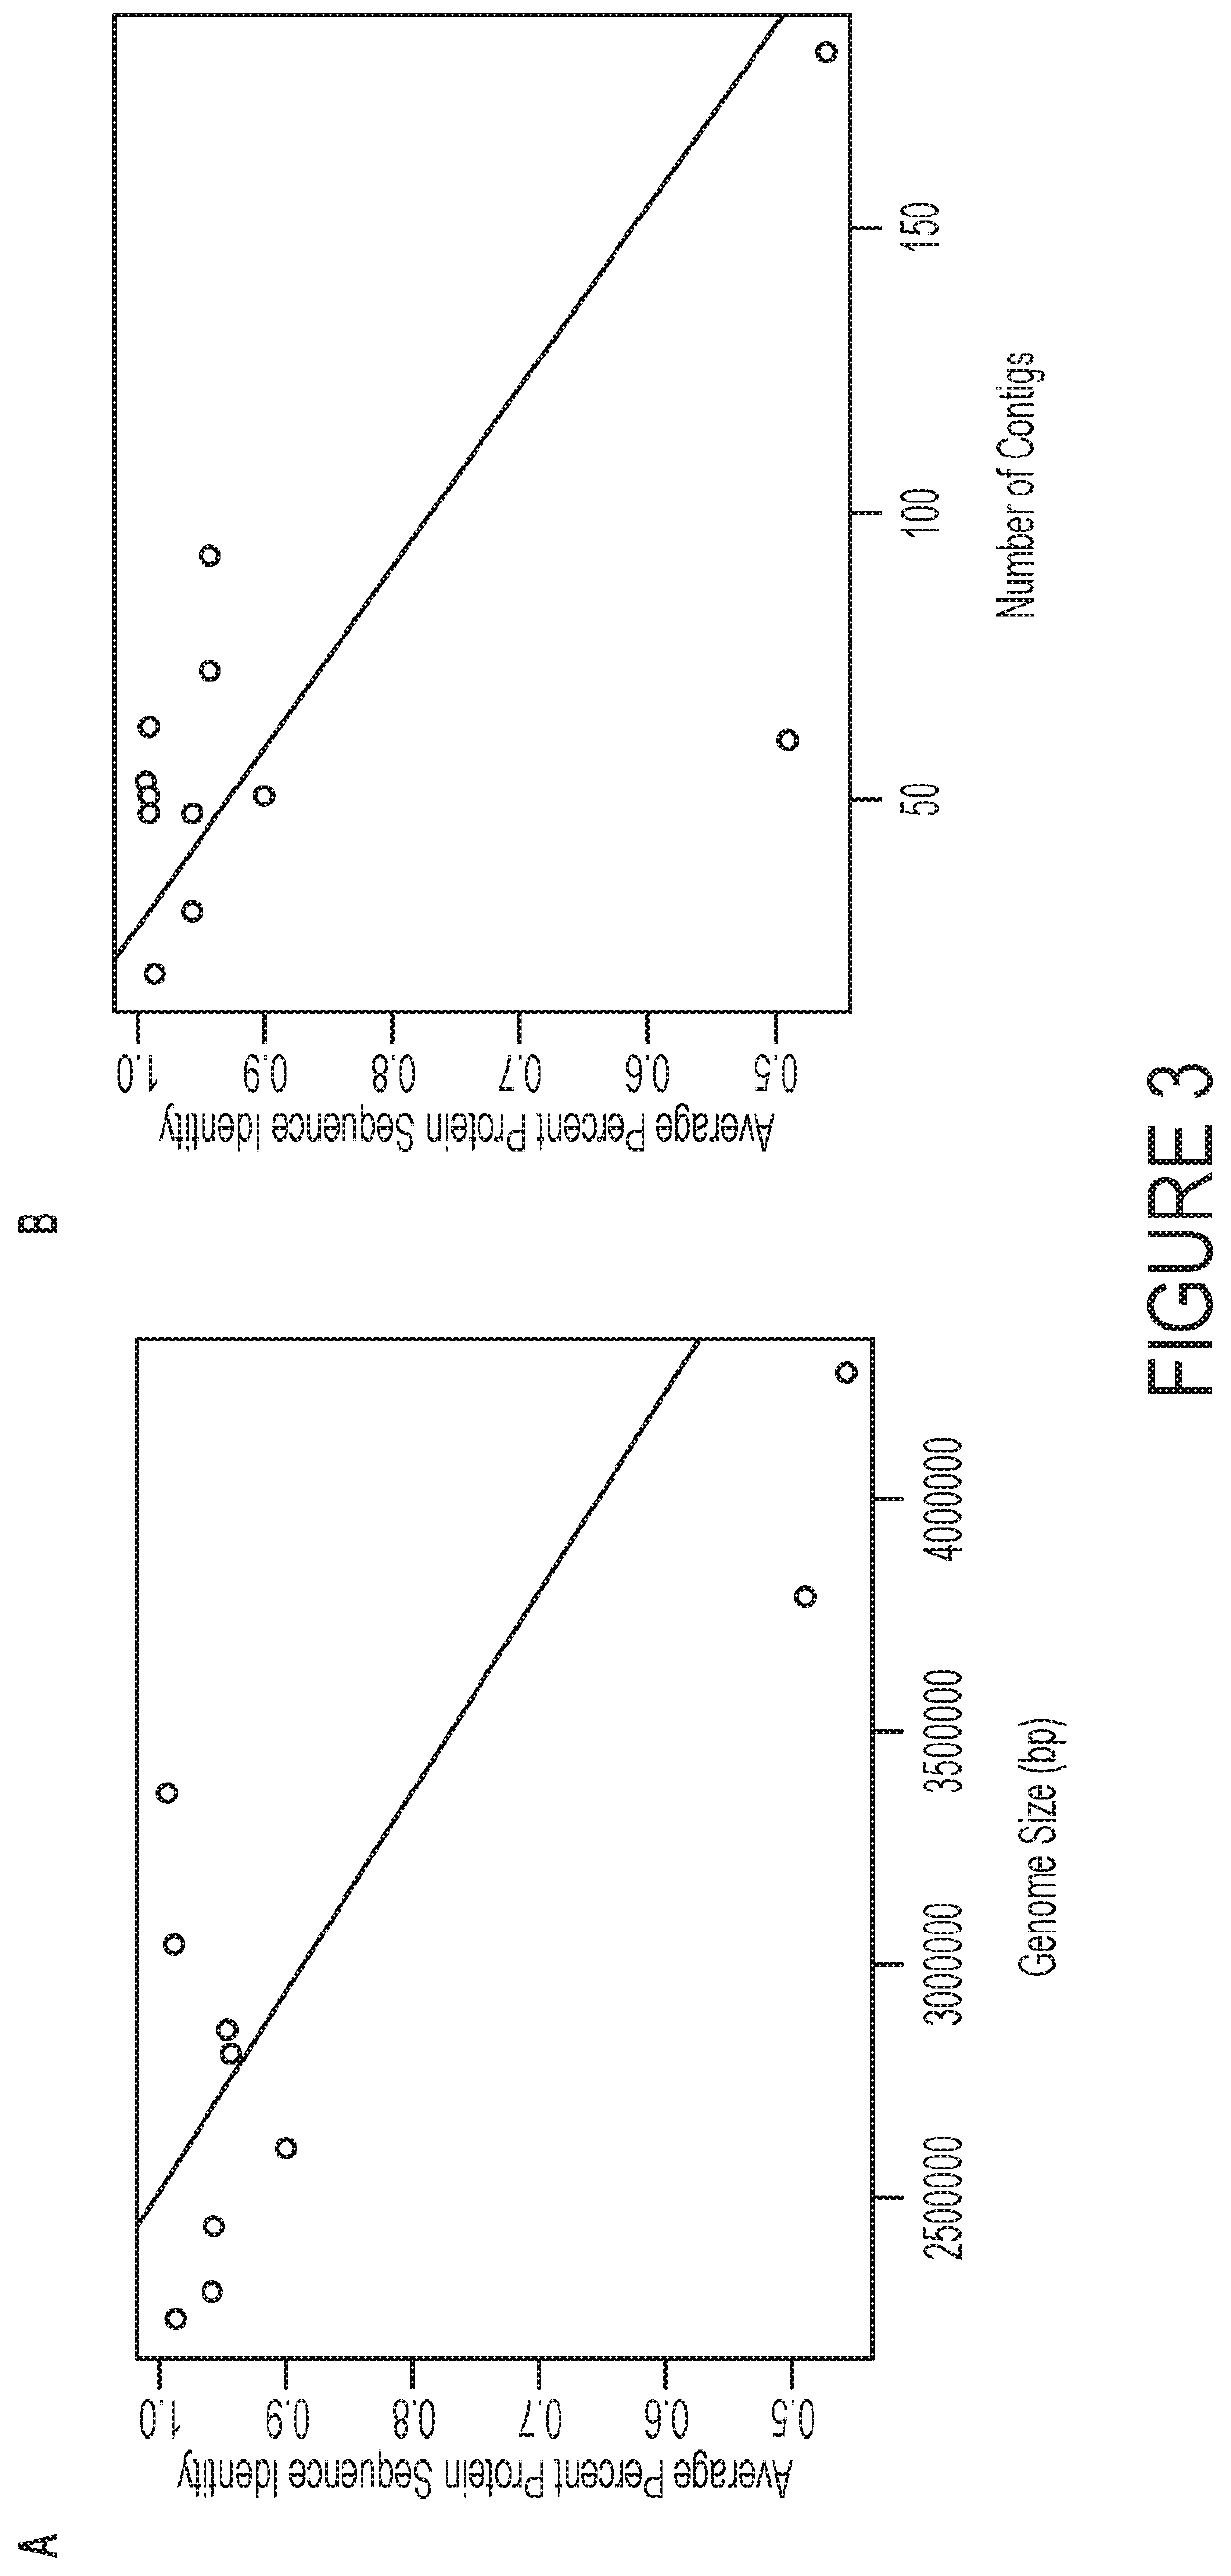 Systems and methods for treating a dysbiosis using fecal-derived bacterial populations